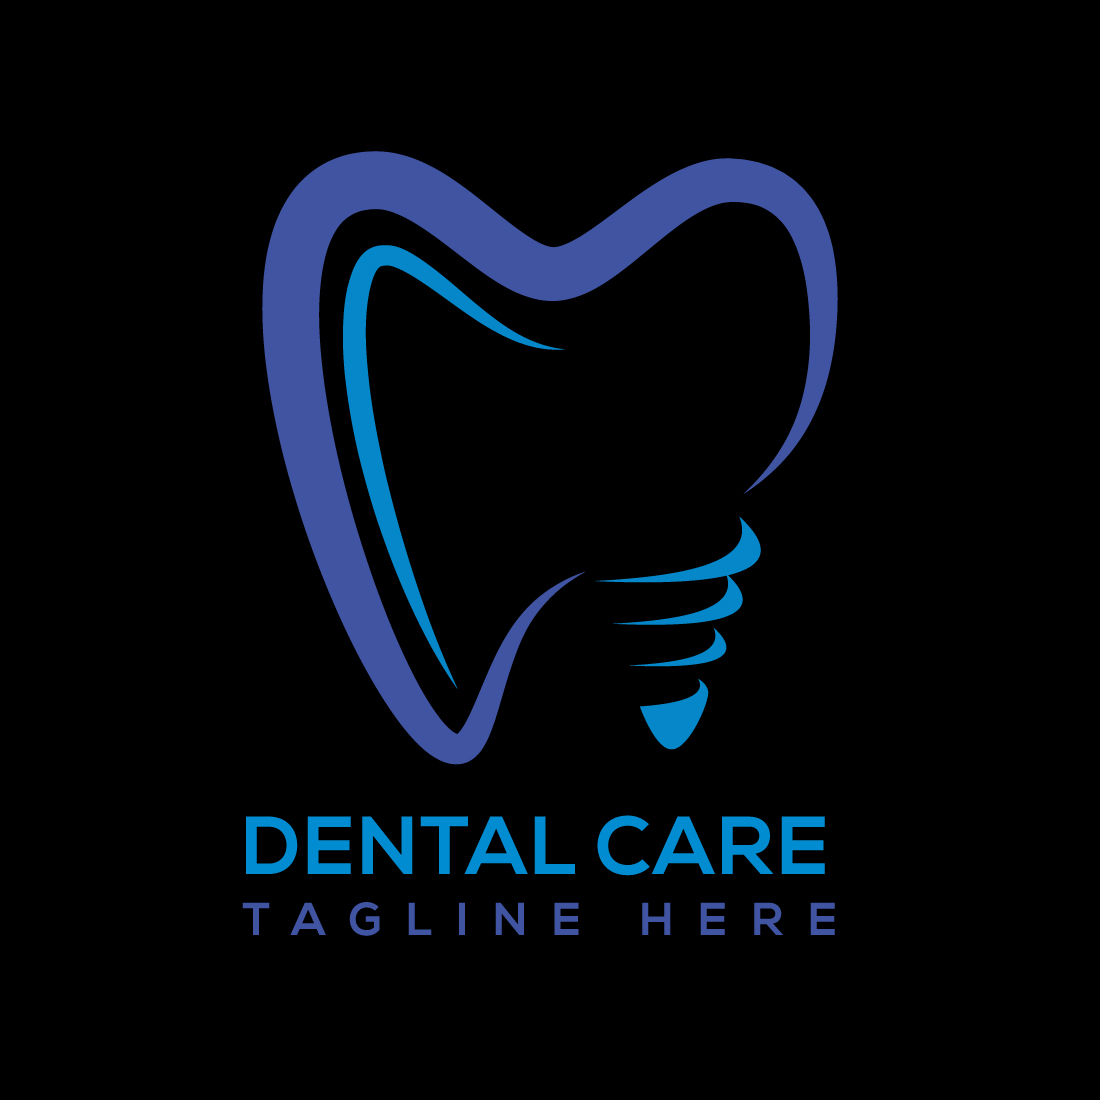 Image of an adorable tooth shaped logo on a black background.